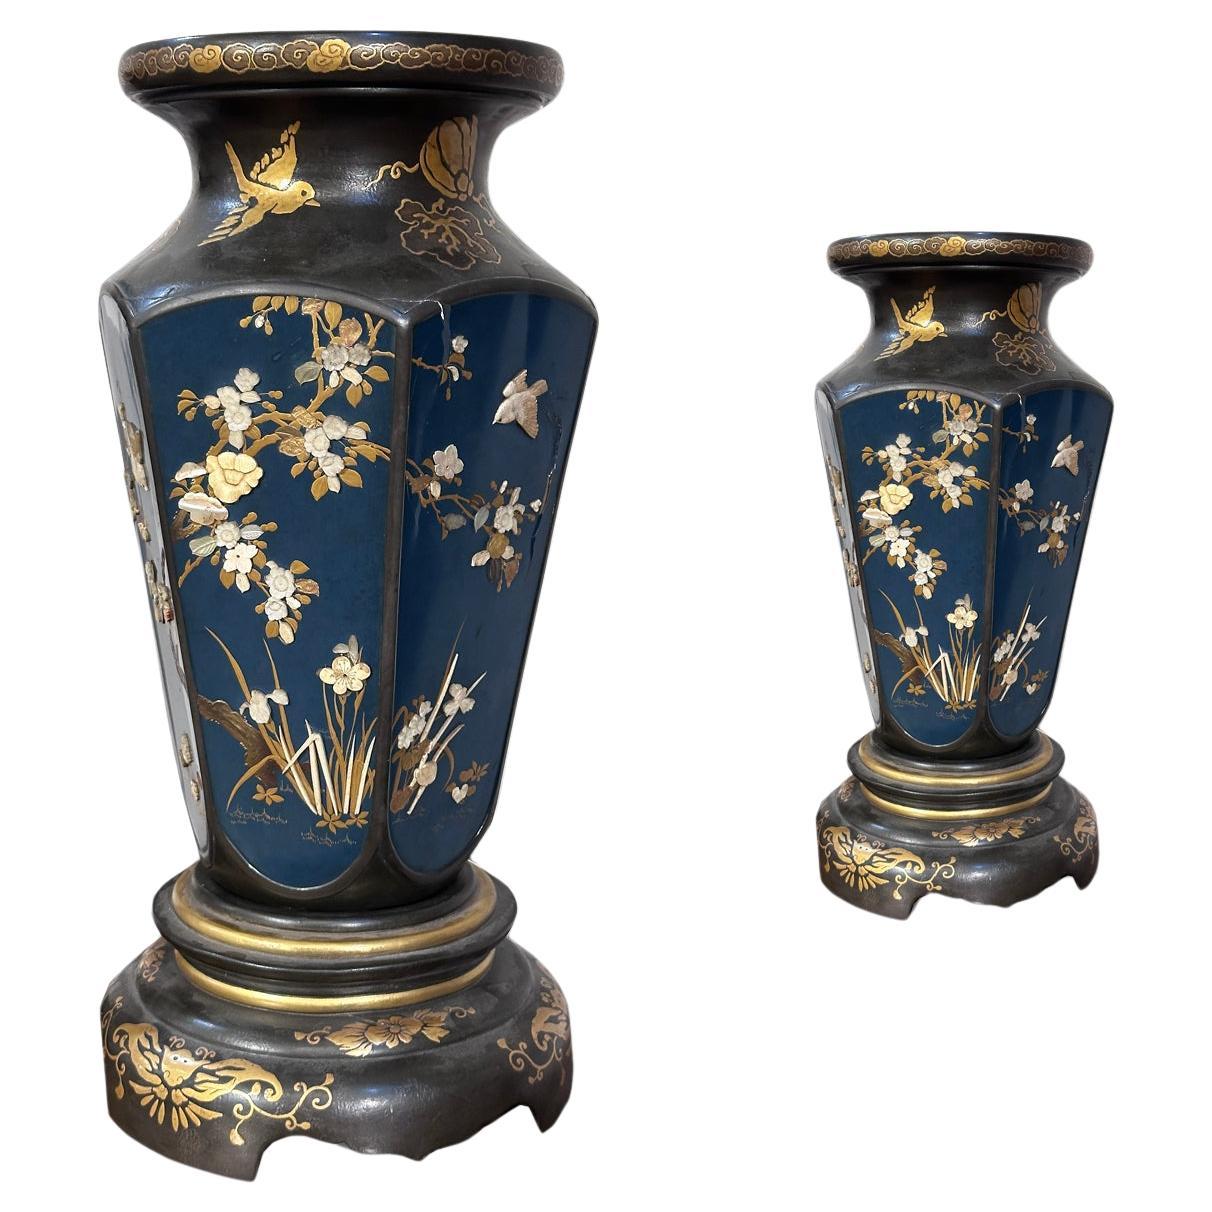 END OF THE 19th CENTURY PAIR OF JAPANESE VASES For Sale